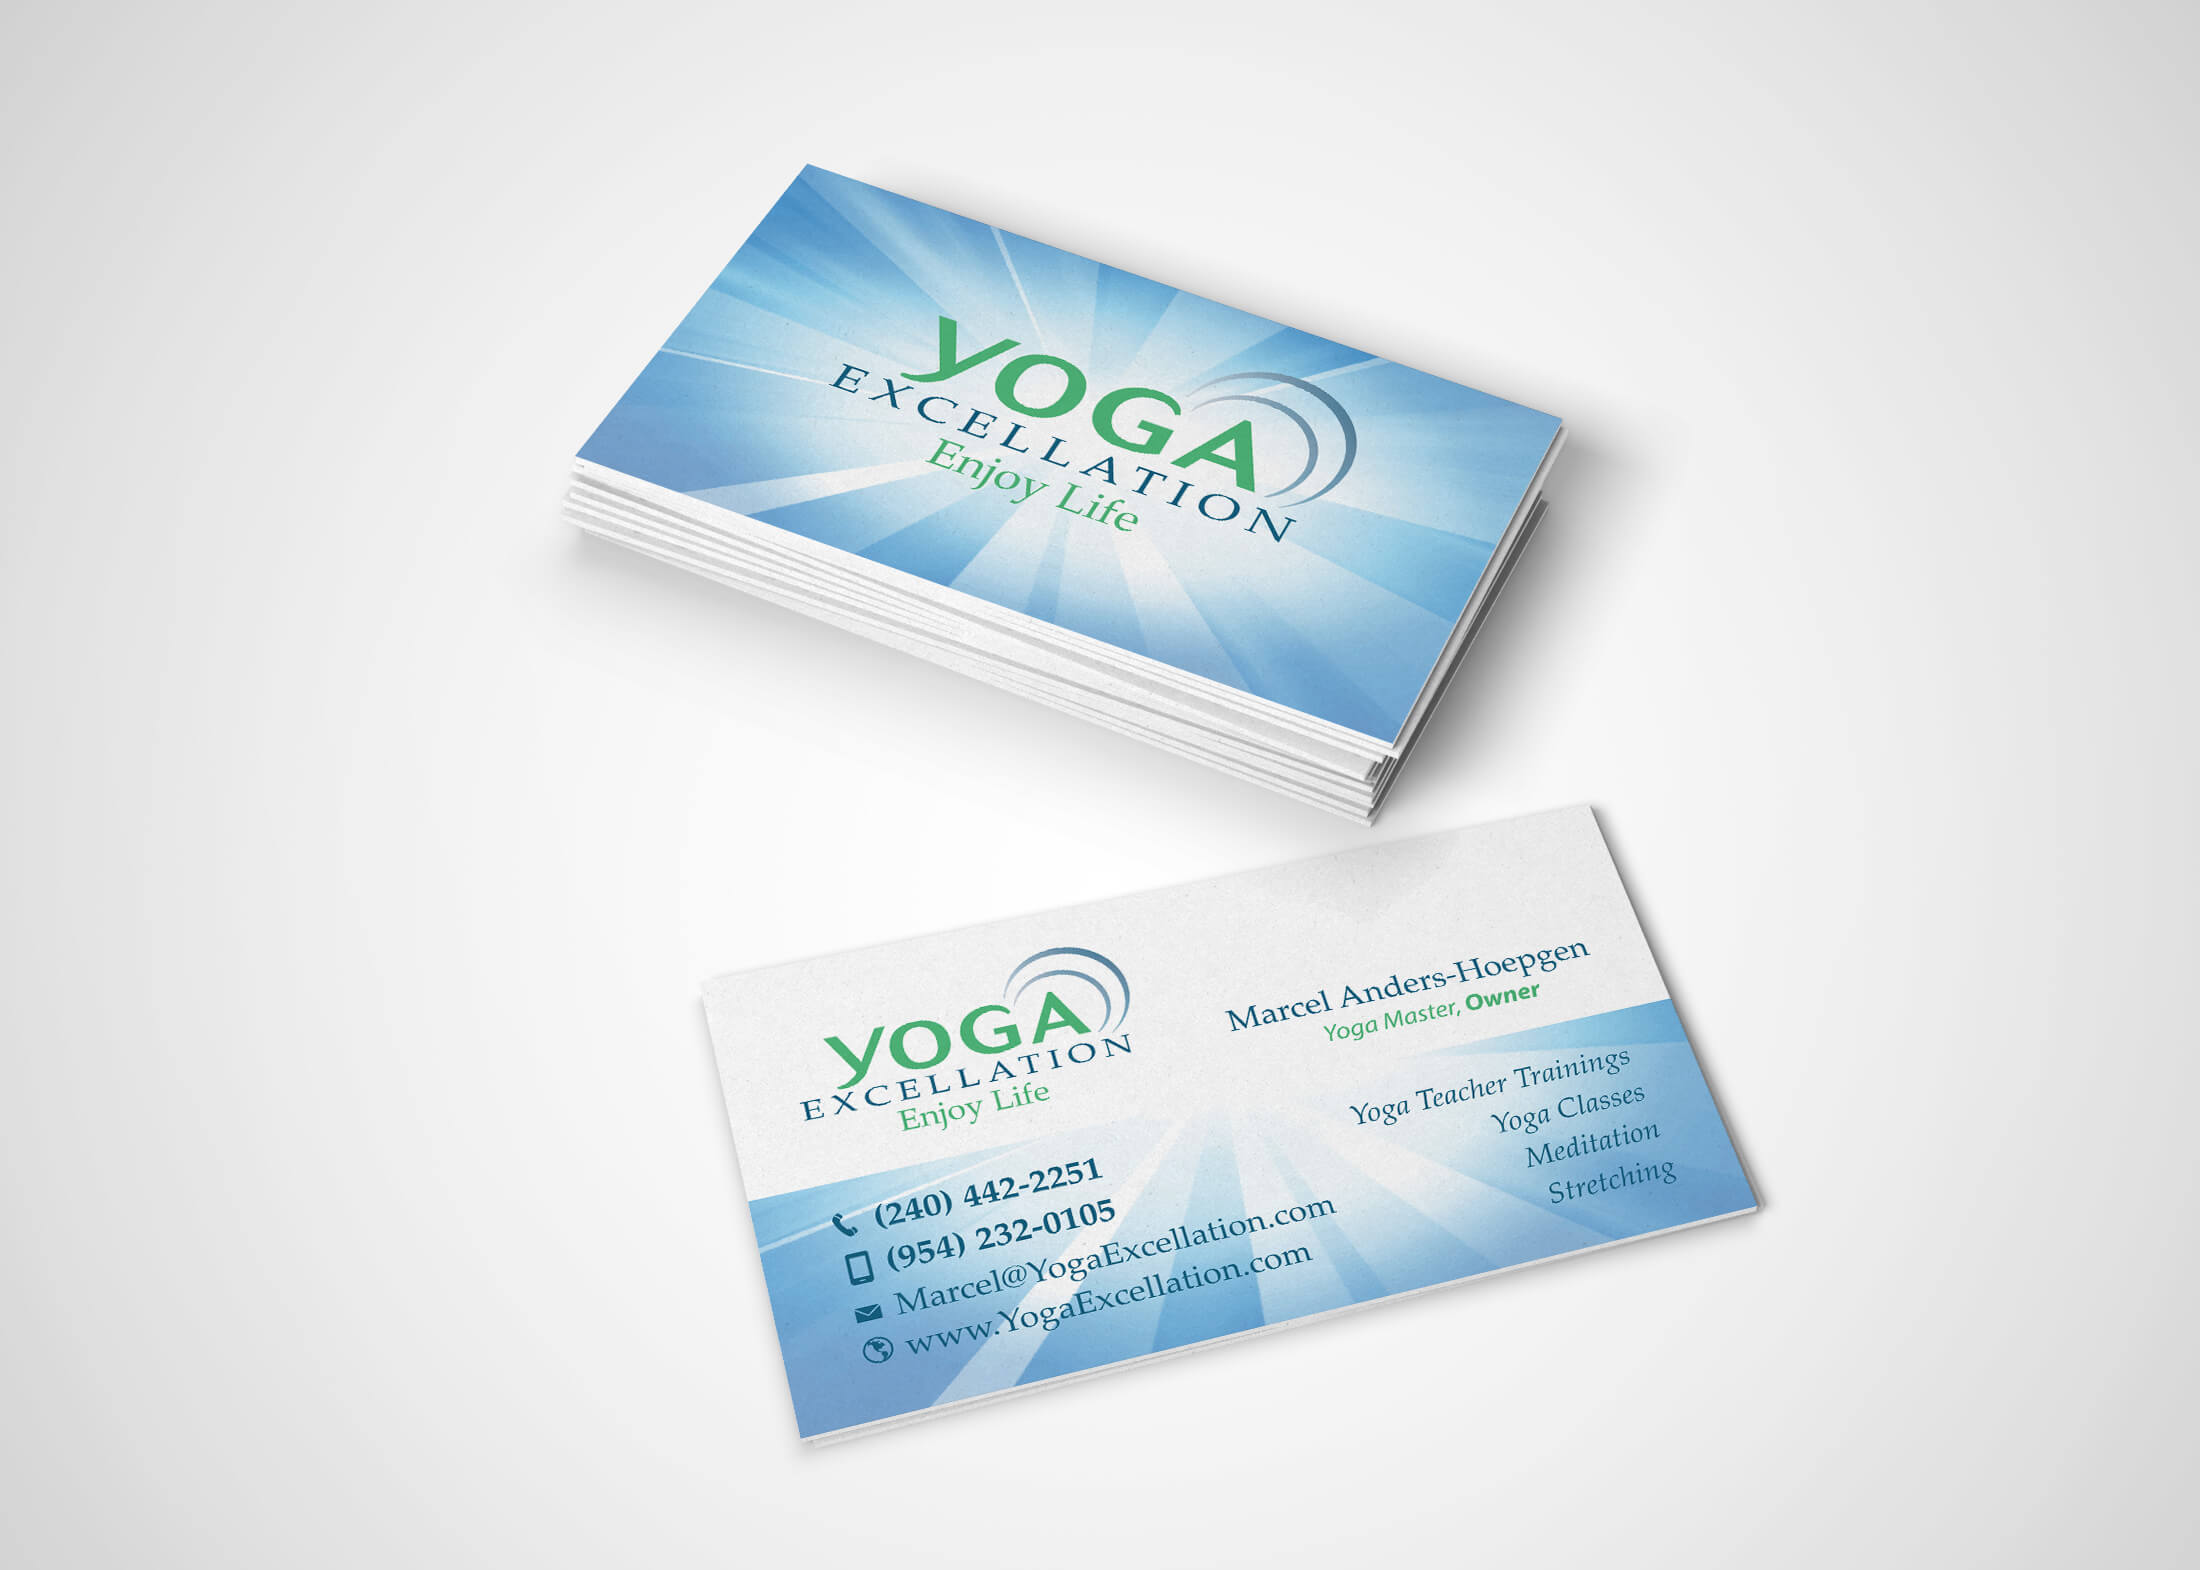 yoga-excellation-businesscards(1)